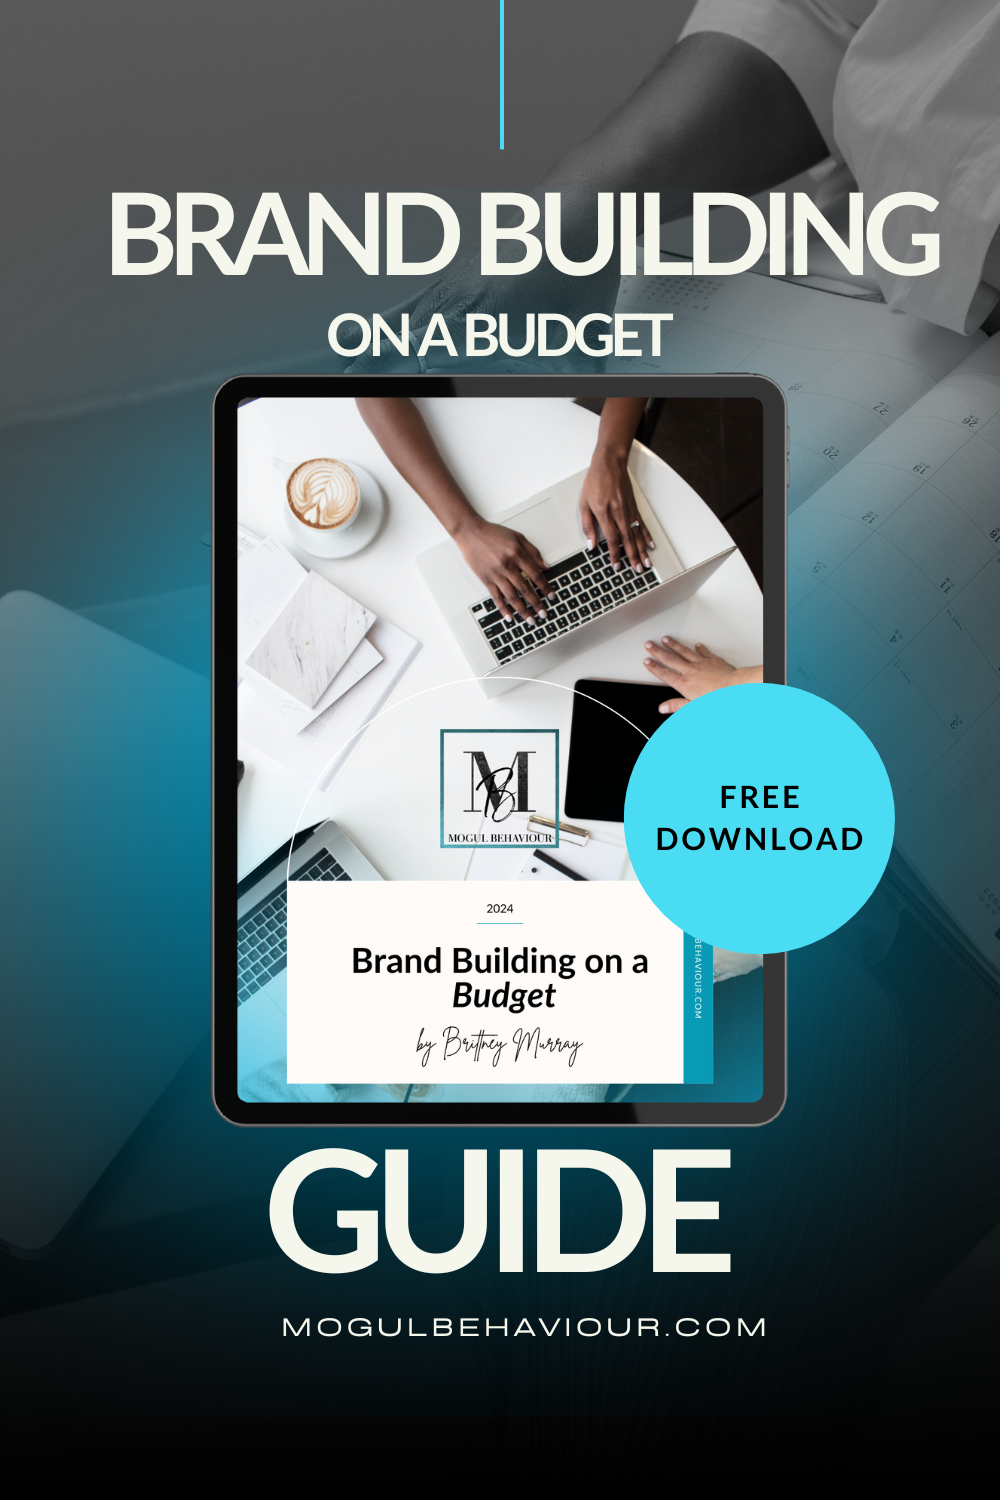 Brand building on a budget free guide